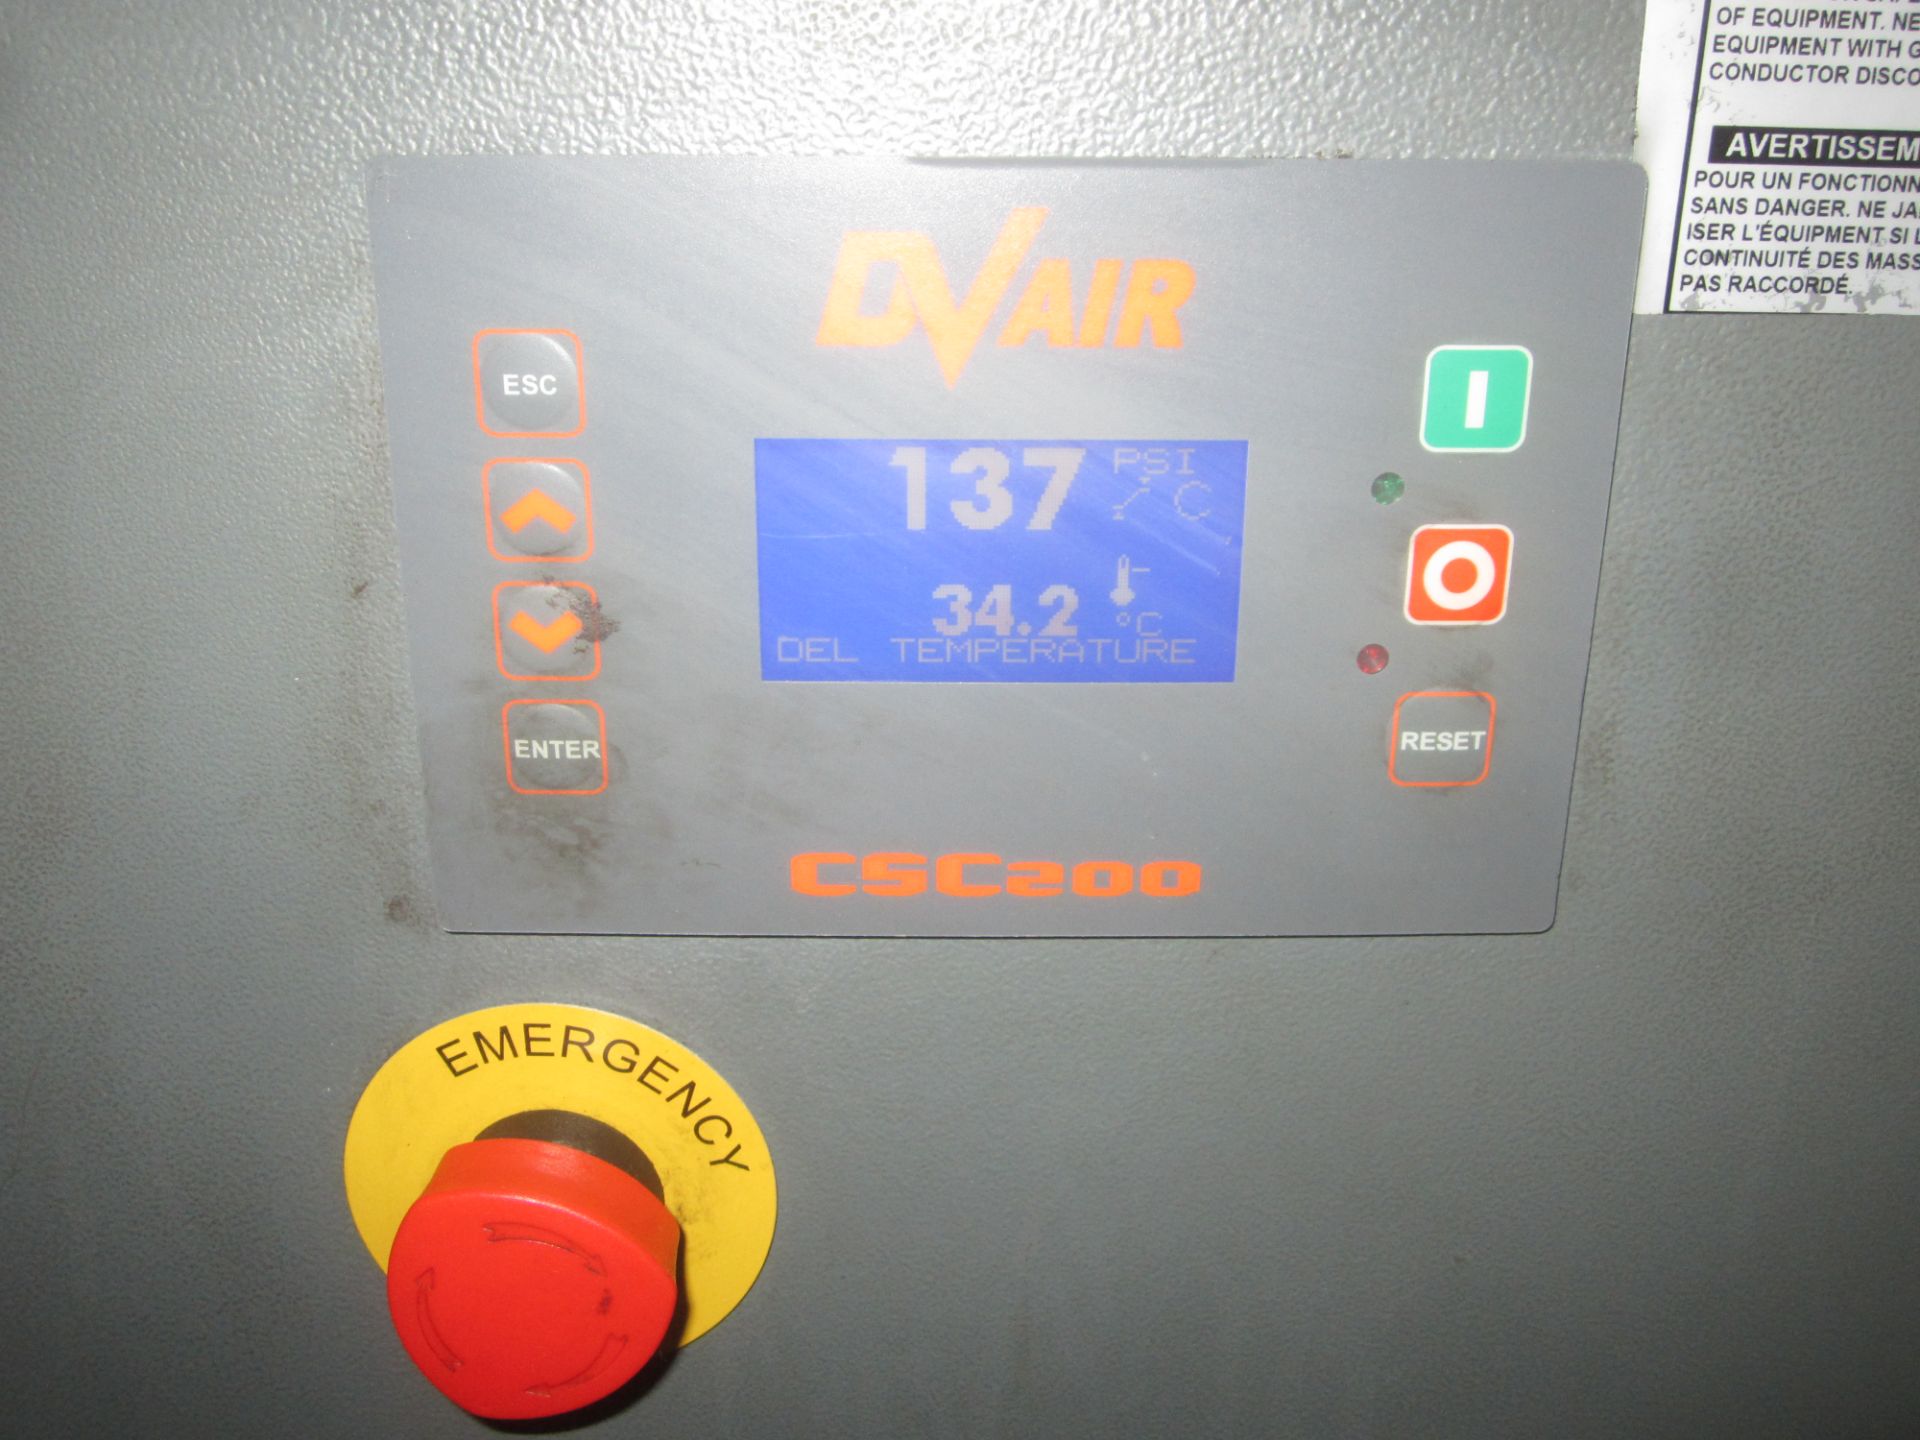 DV Systems Model C15TD Rotary Screw Air Compressor, s/n 37235, 15 HP, Built In Refrigerated Air - Image 5 of 8